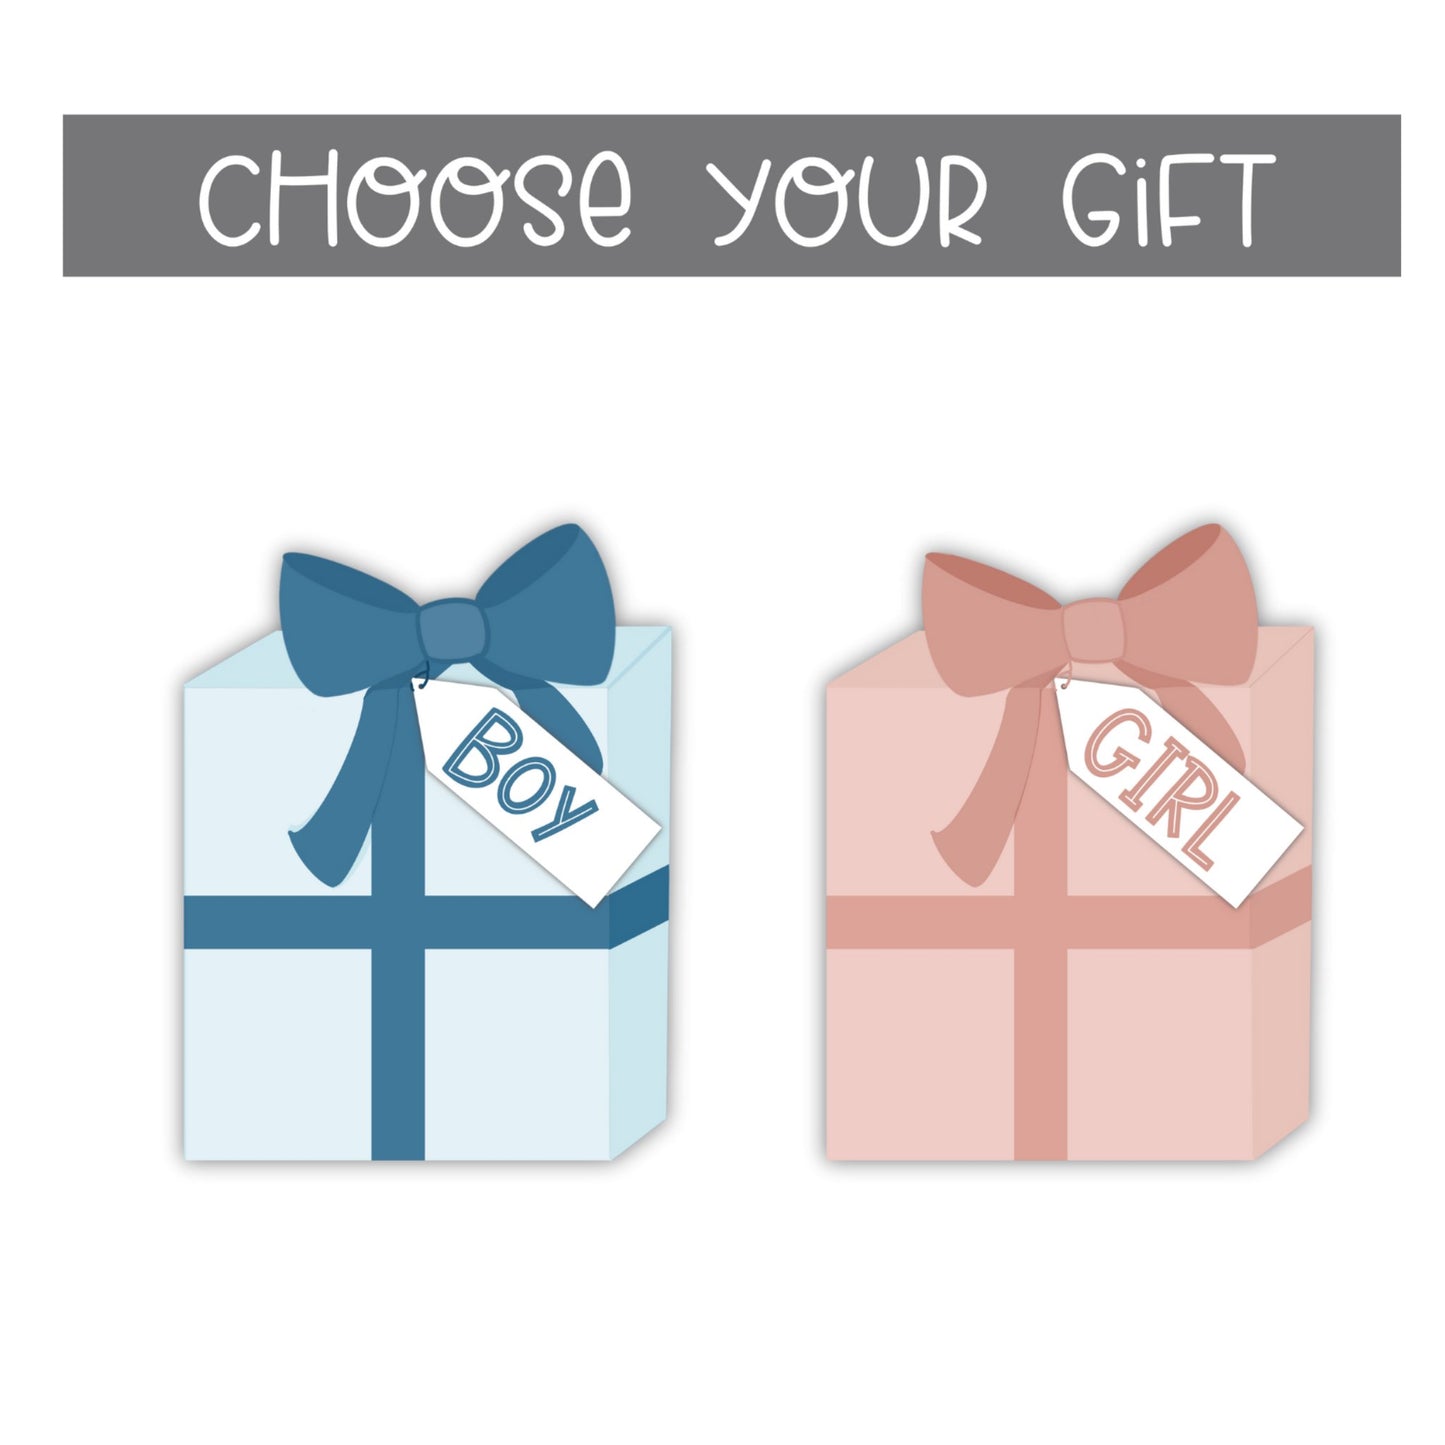 gift certificate example of choose your gift, the boy or girl gender version of the self-published personalized gift- a children’s picture book called “I’m Your Mommy”